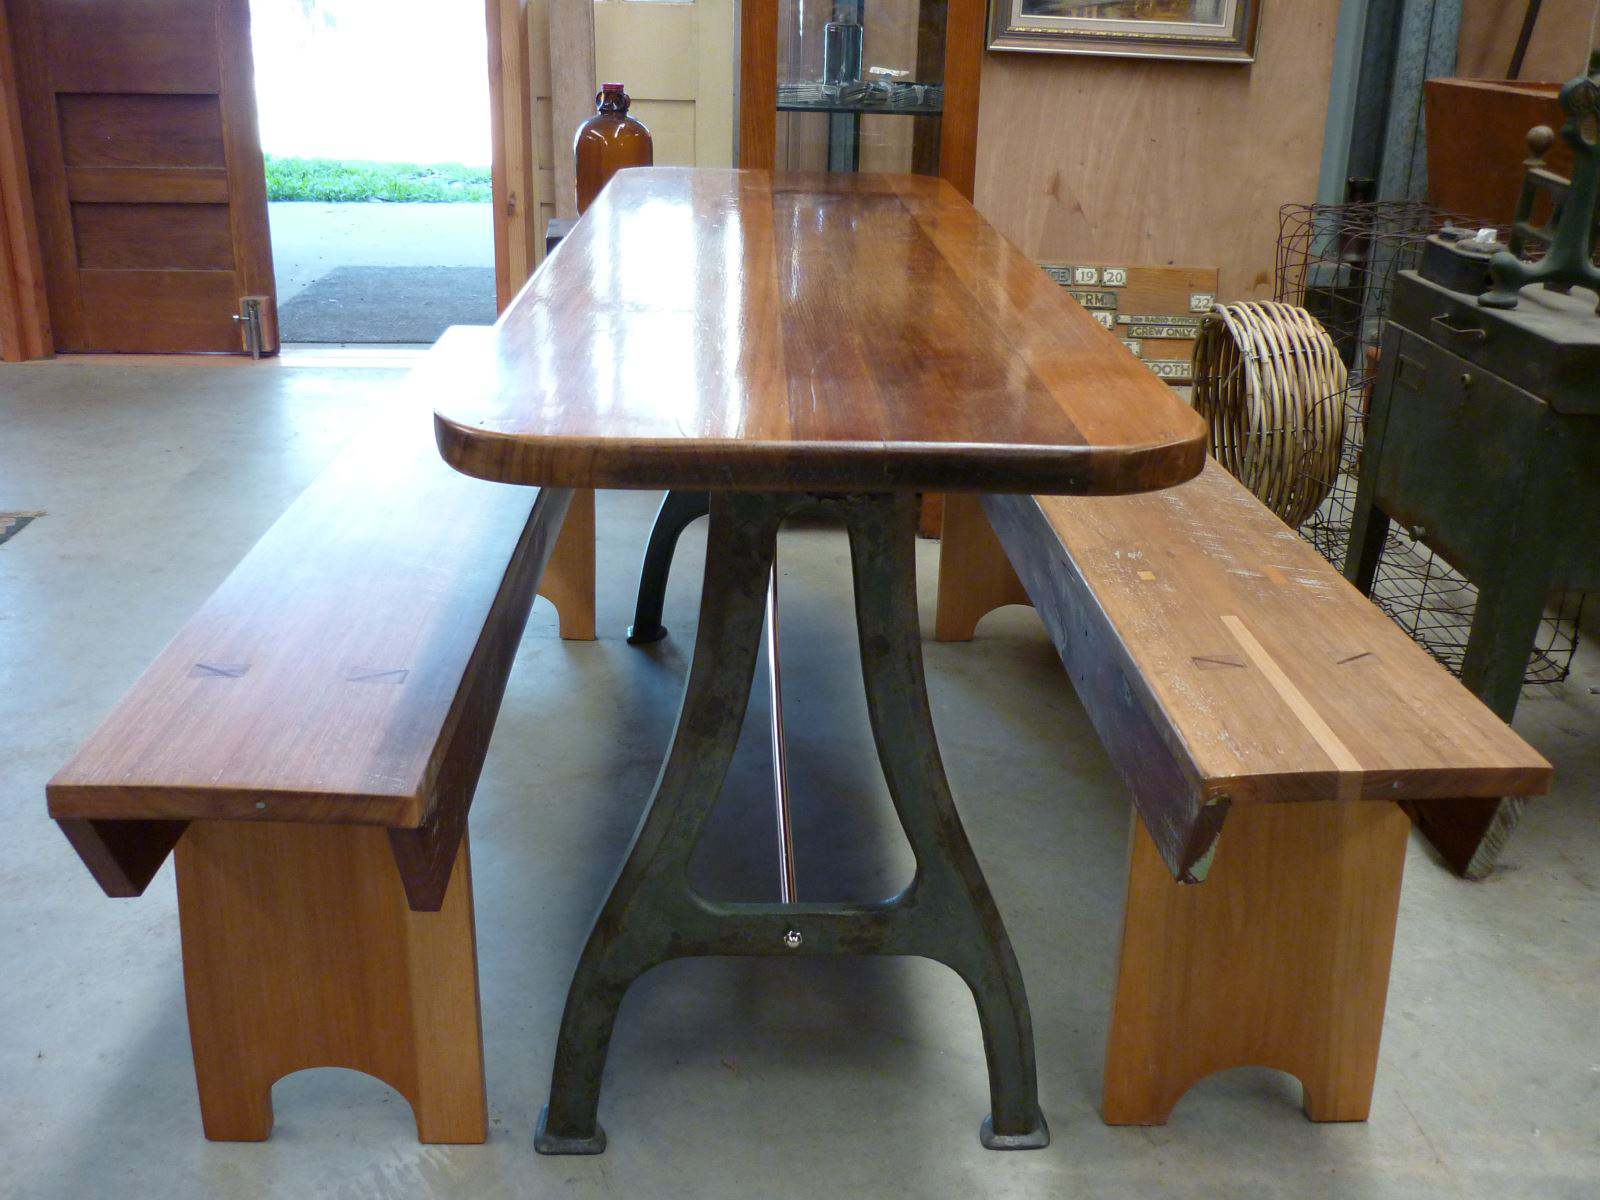 Tasmanian Blackwood Table with Cast Iron Legs & a Pair of Hardwood Bench Forms to Match